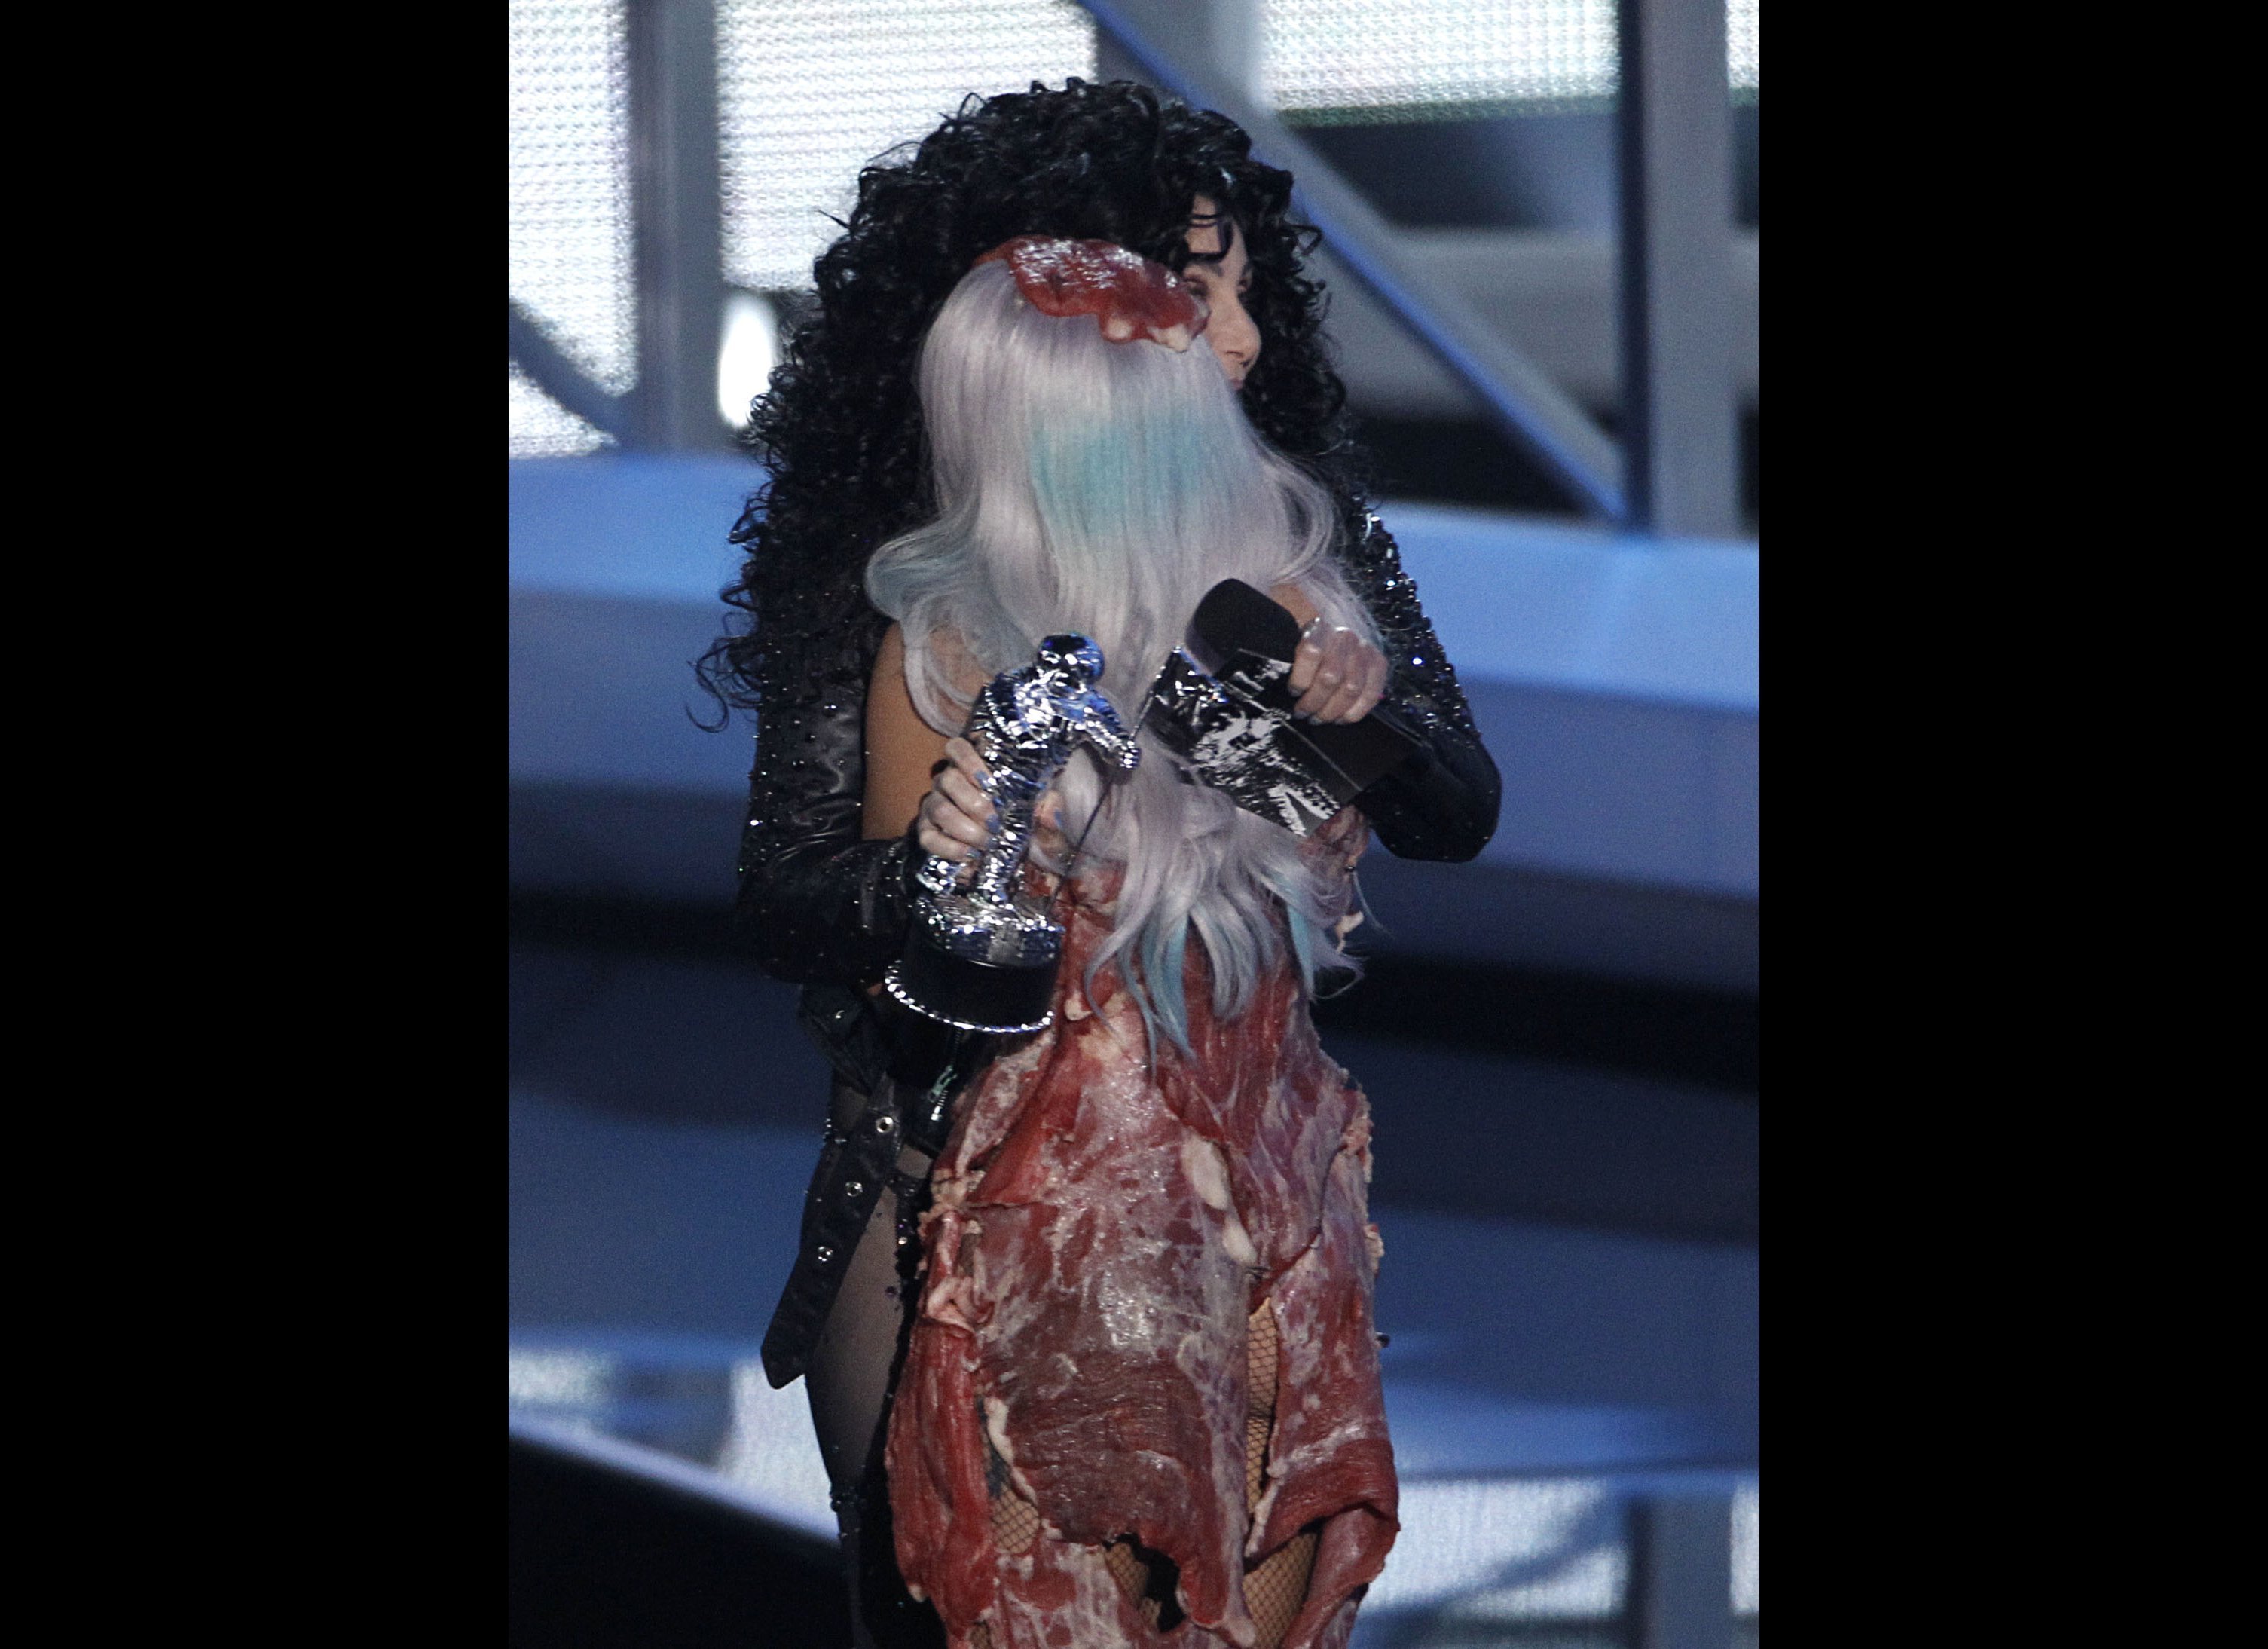 Gaga's meat dress: Brilliant, disgusting, or both? - The Globe and Mail